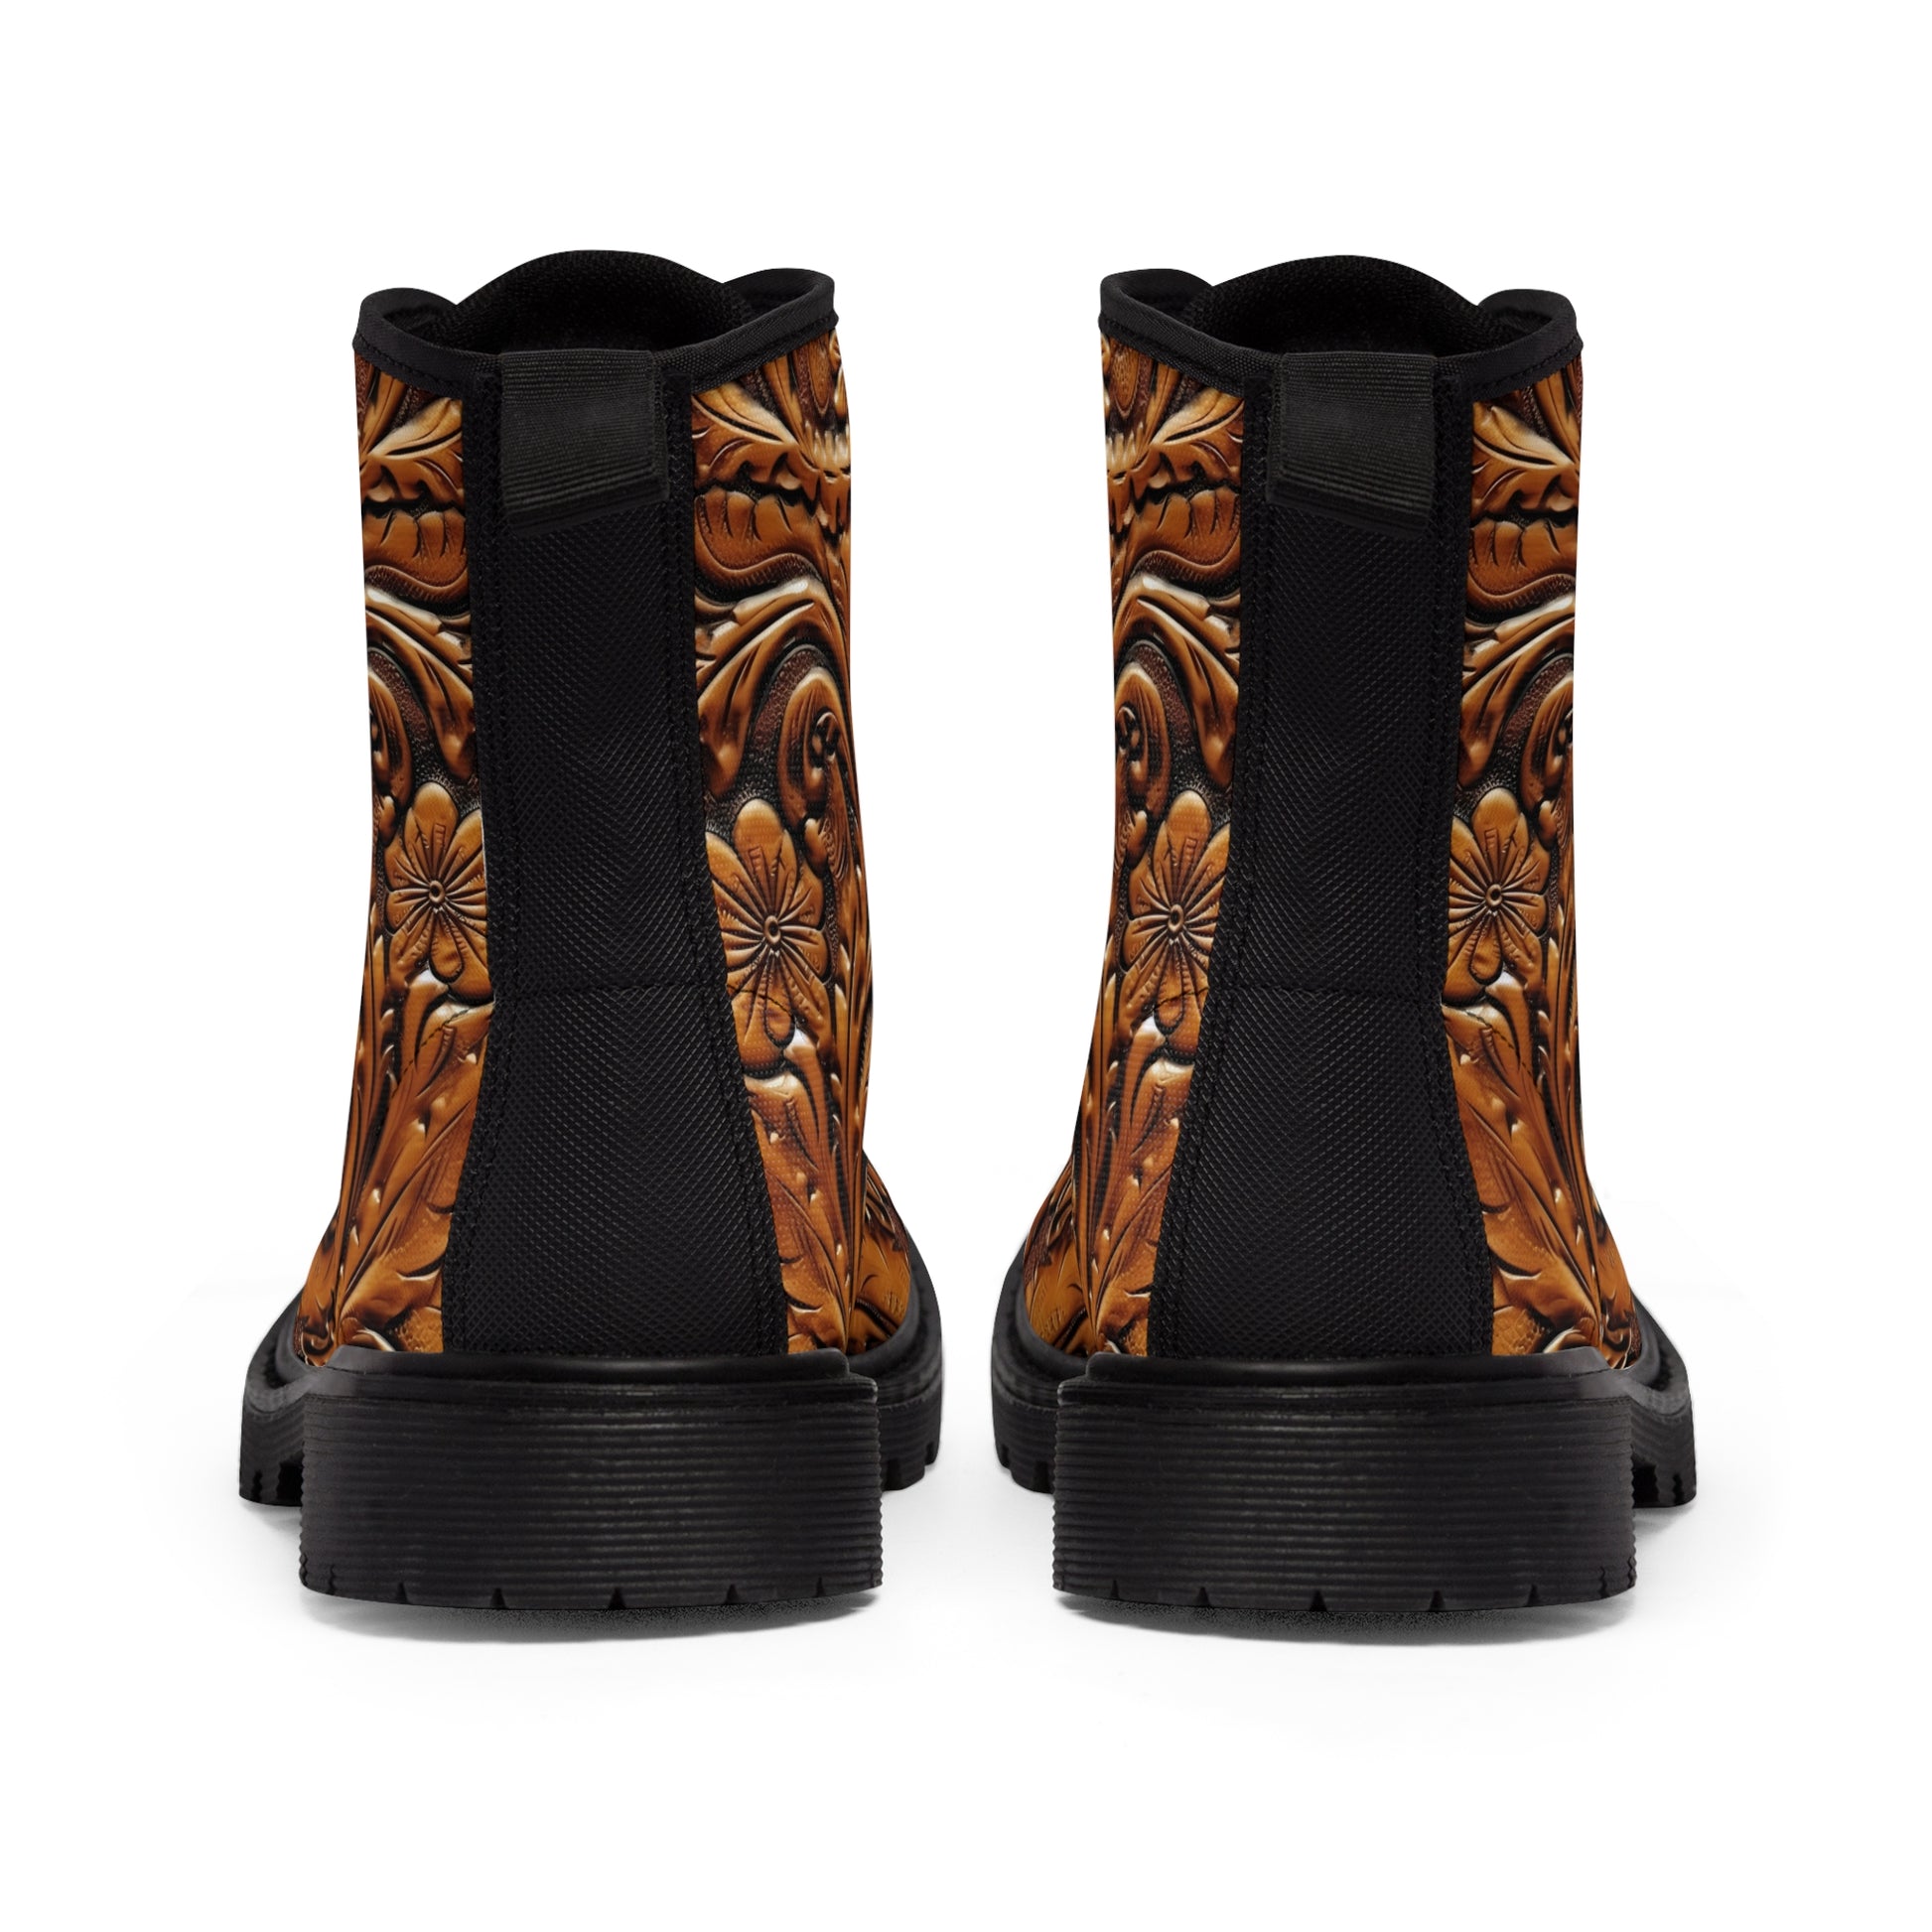 Tooled Leather Women's Canvas Boots (Black) by Studio Ten Design